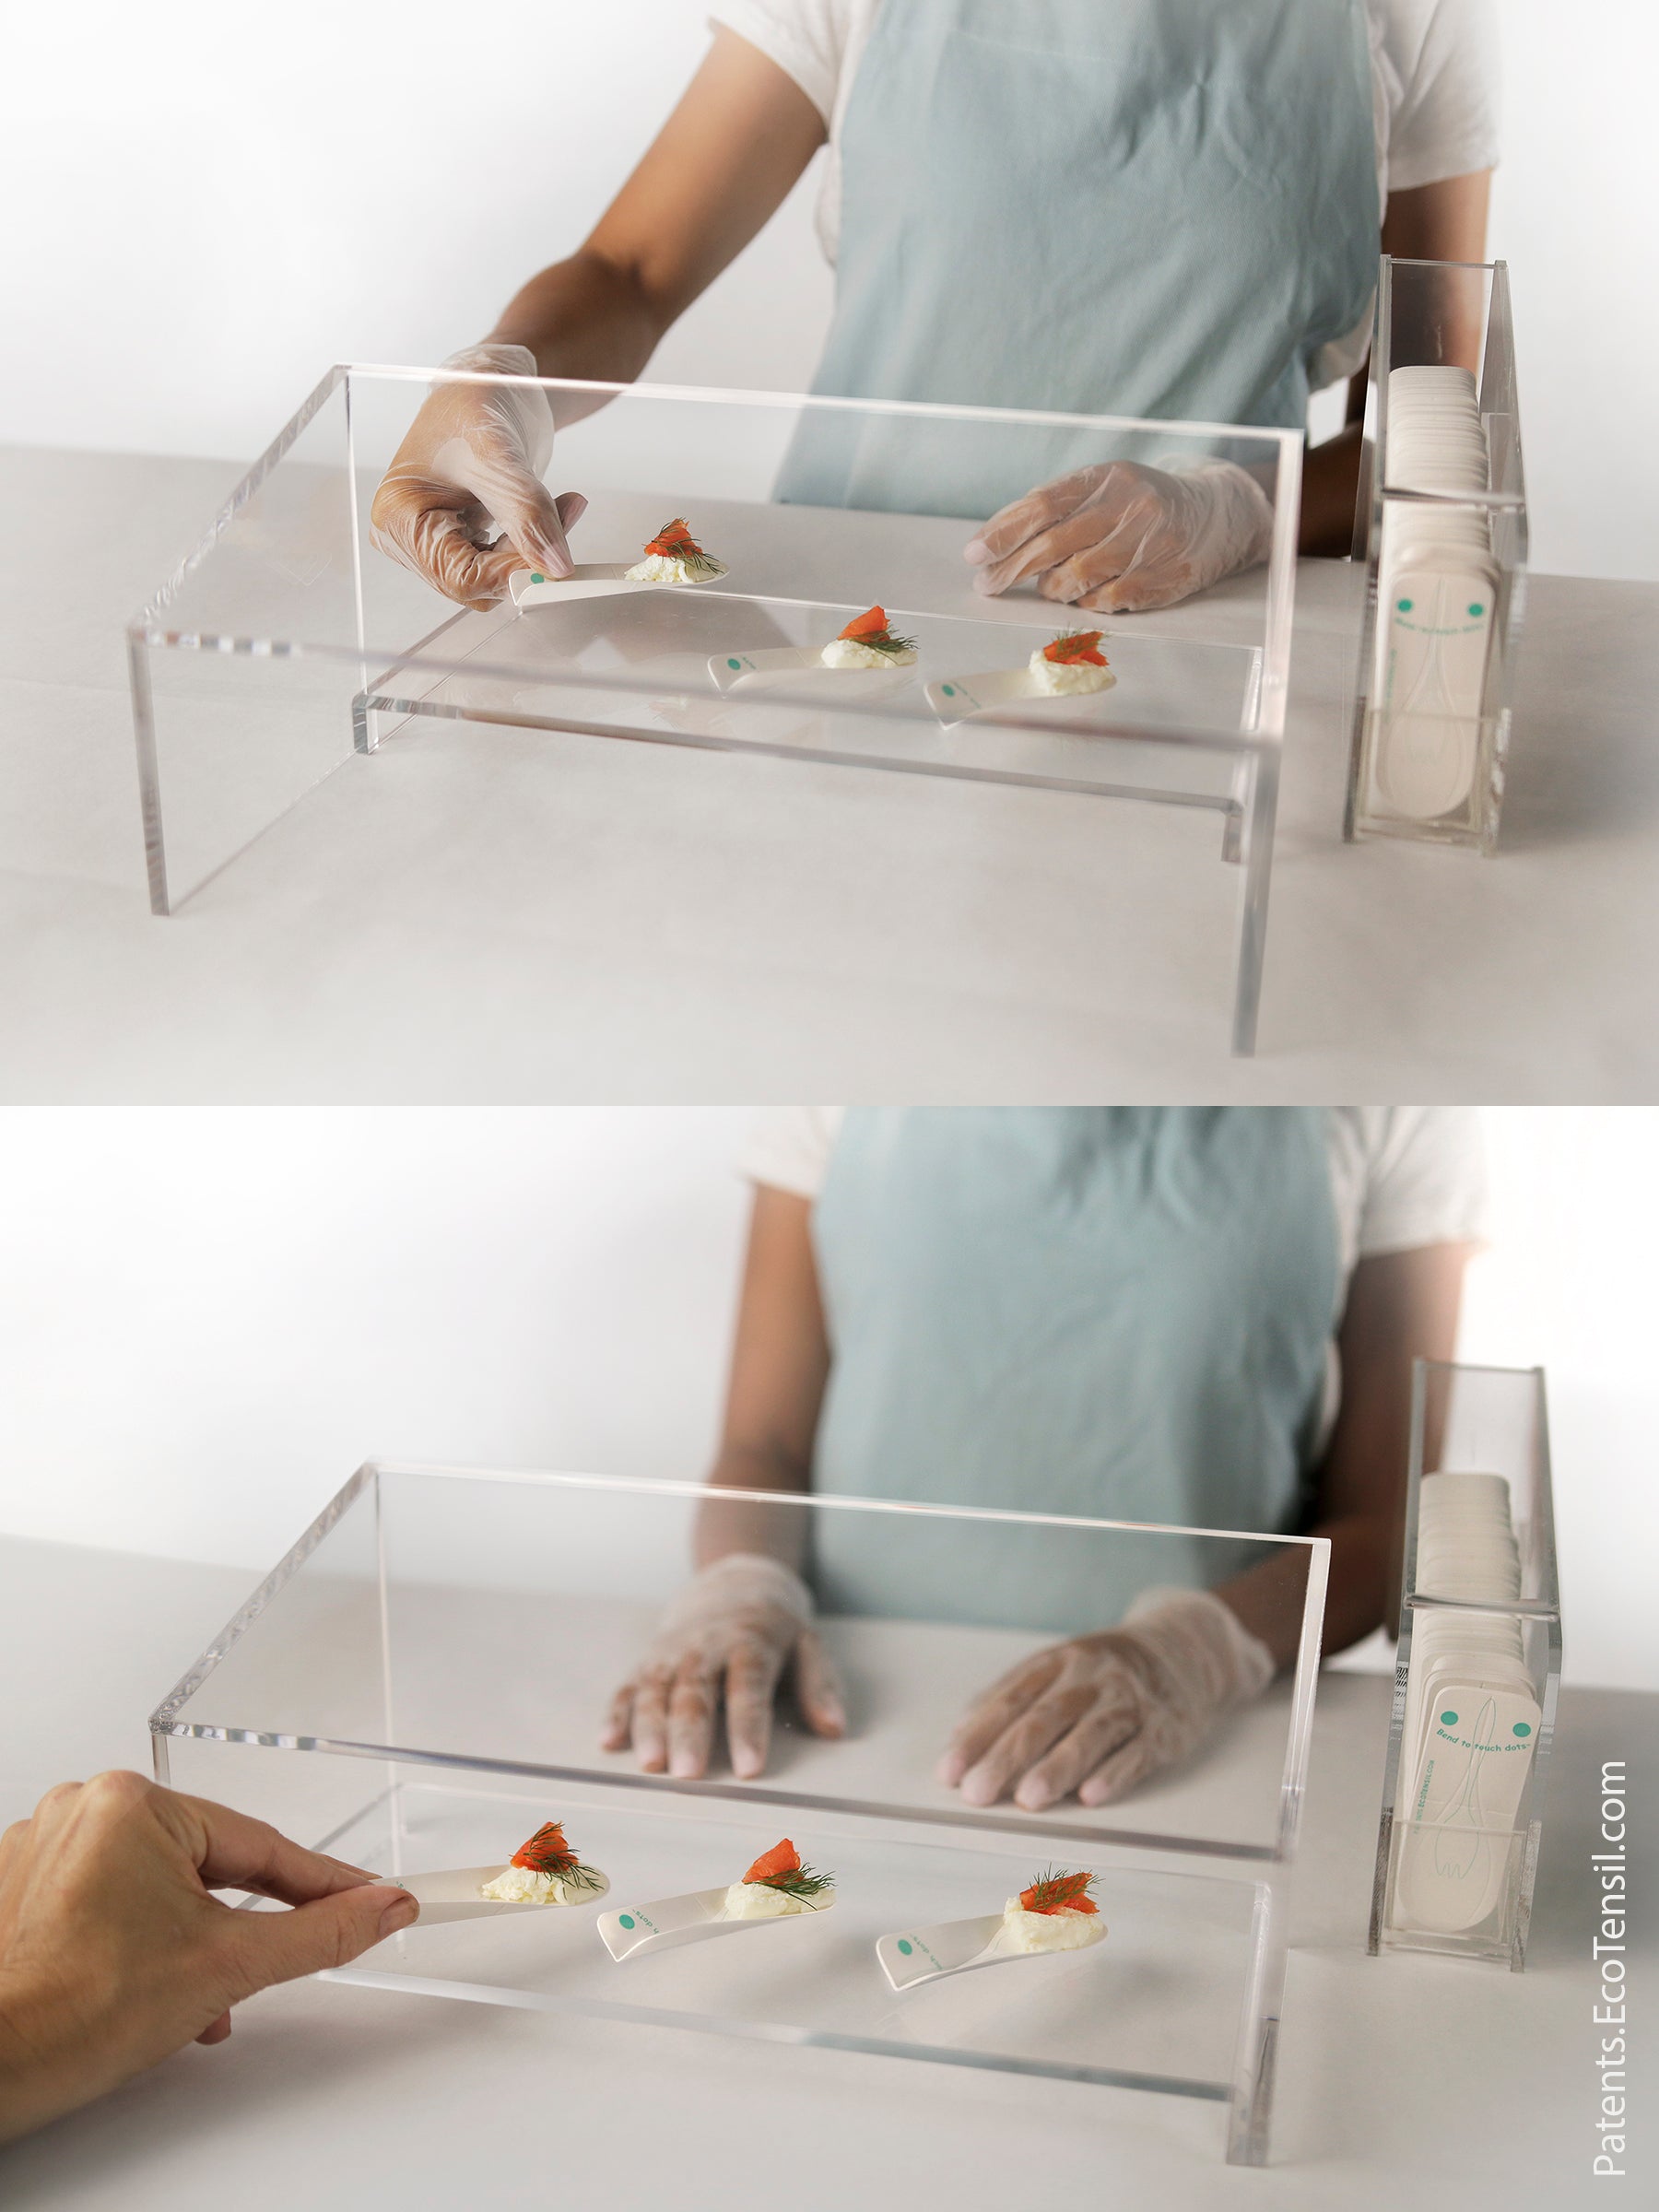 SafeServe™ plexi food cover with slide-out tray